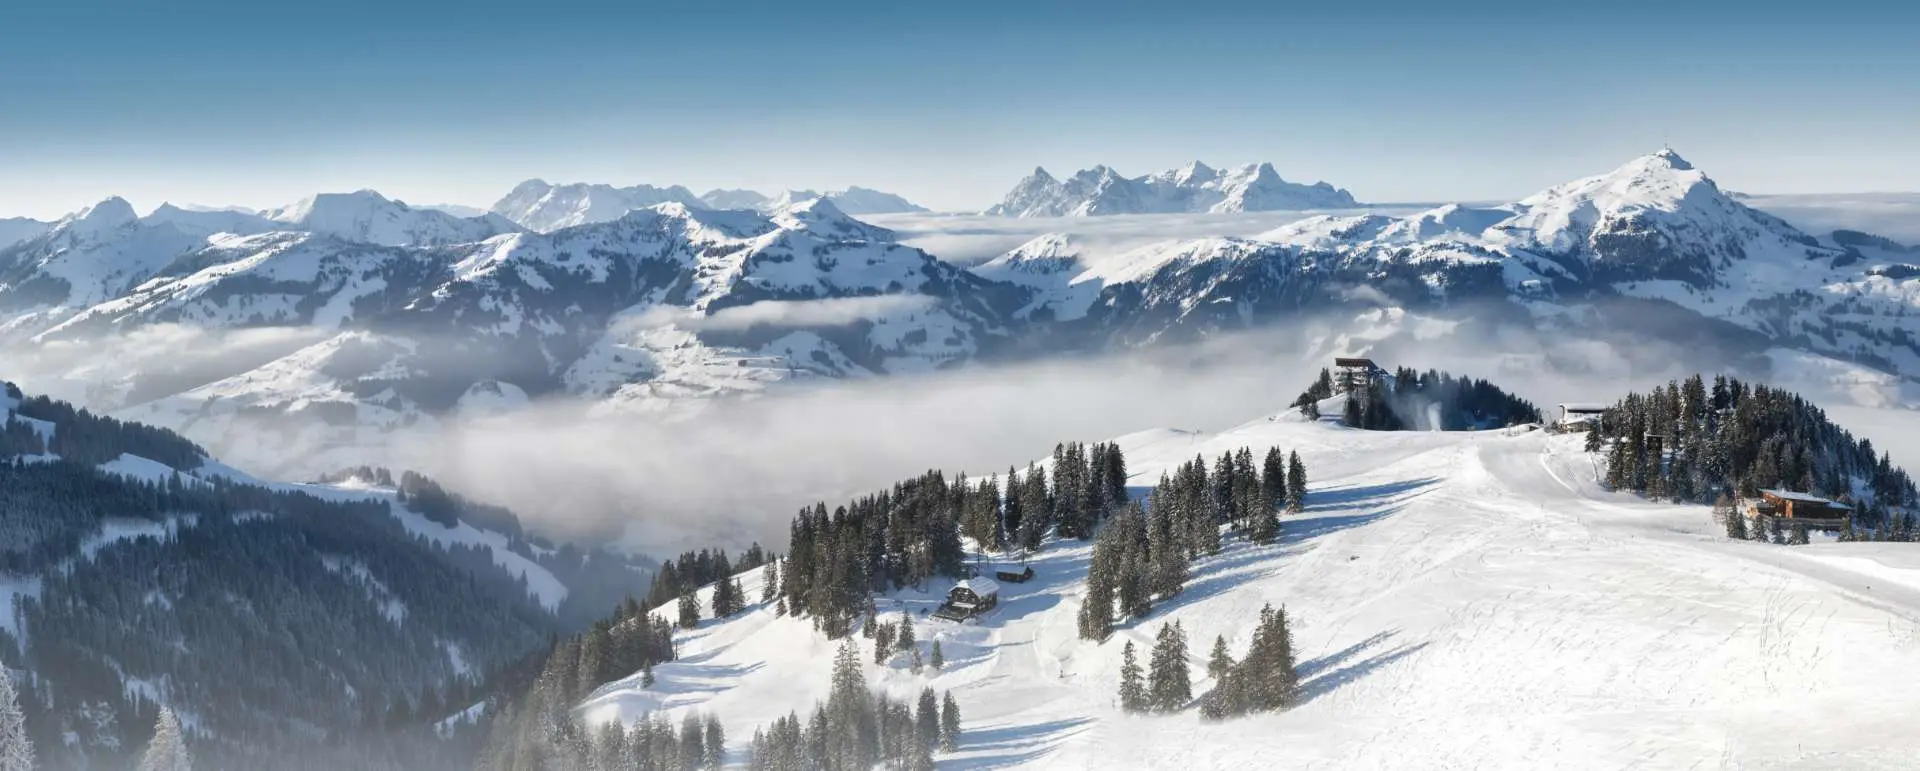 Kitzbühel Alps - Accessible group travel for all travelers